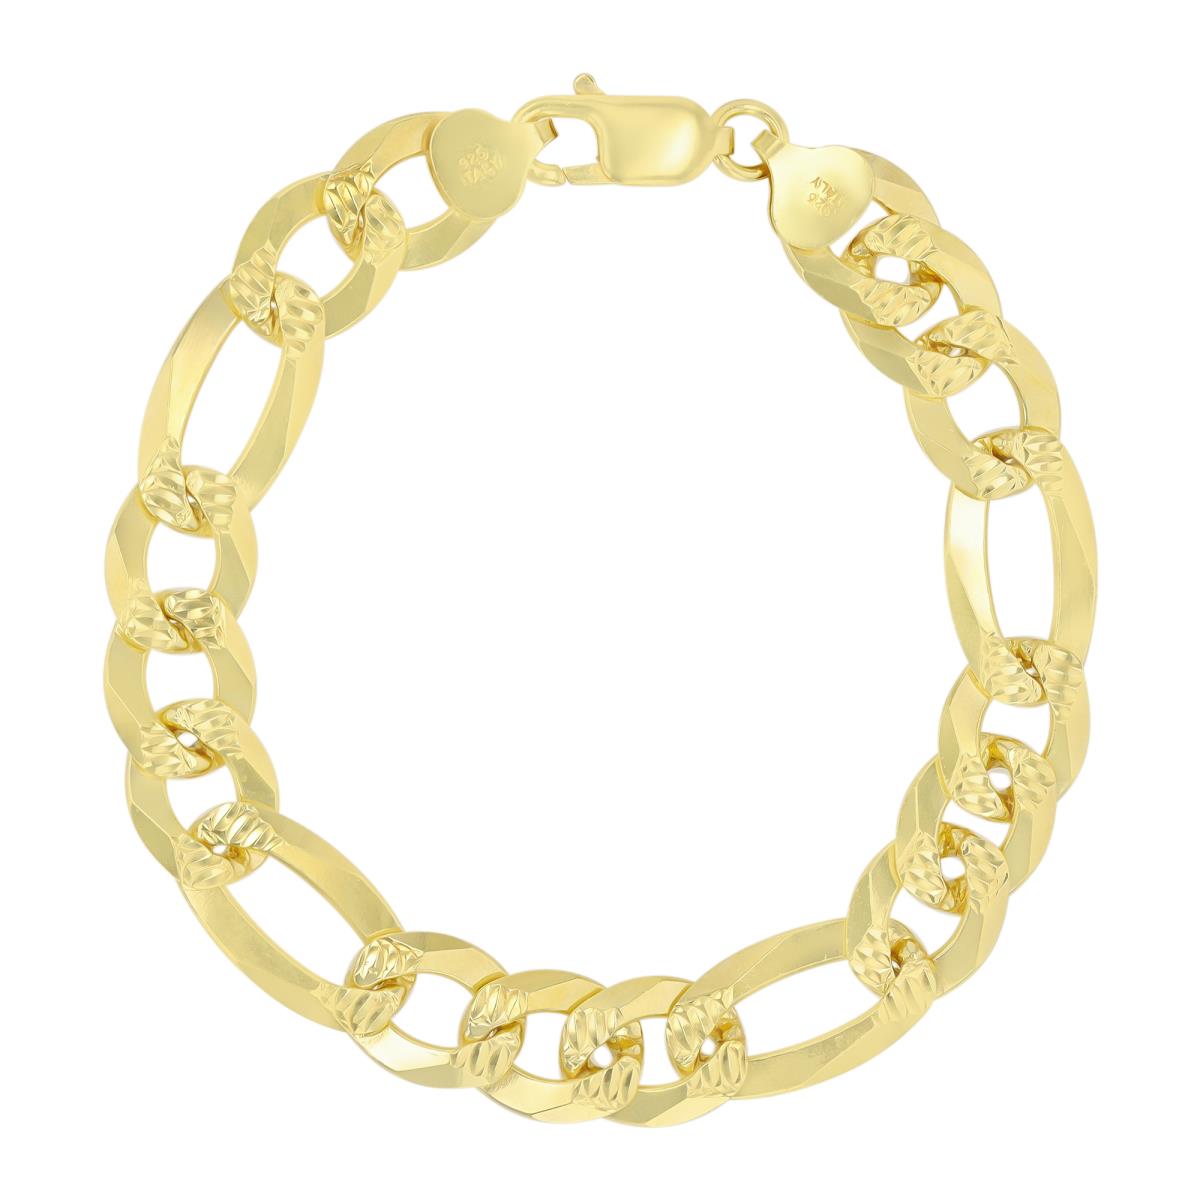 Sterling Silver Yellow DC 280 Figaro 8.5"Chain Bracelet